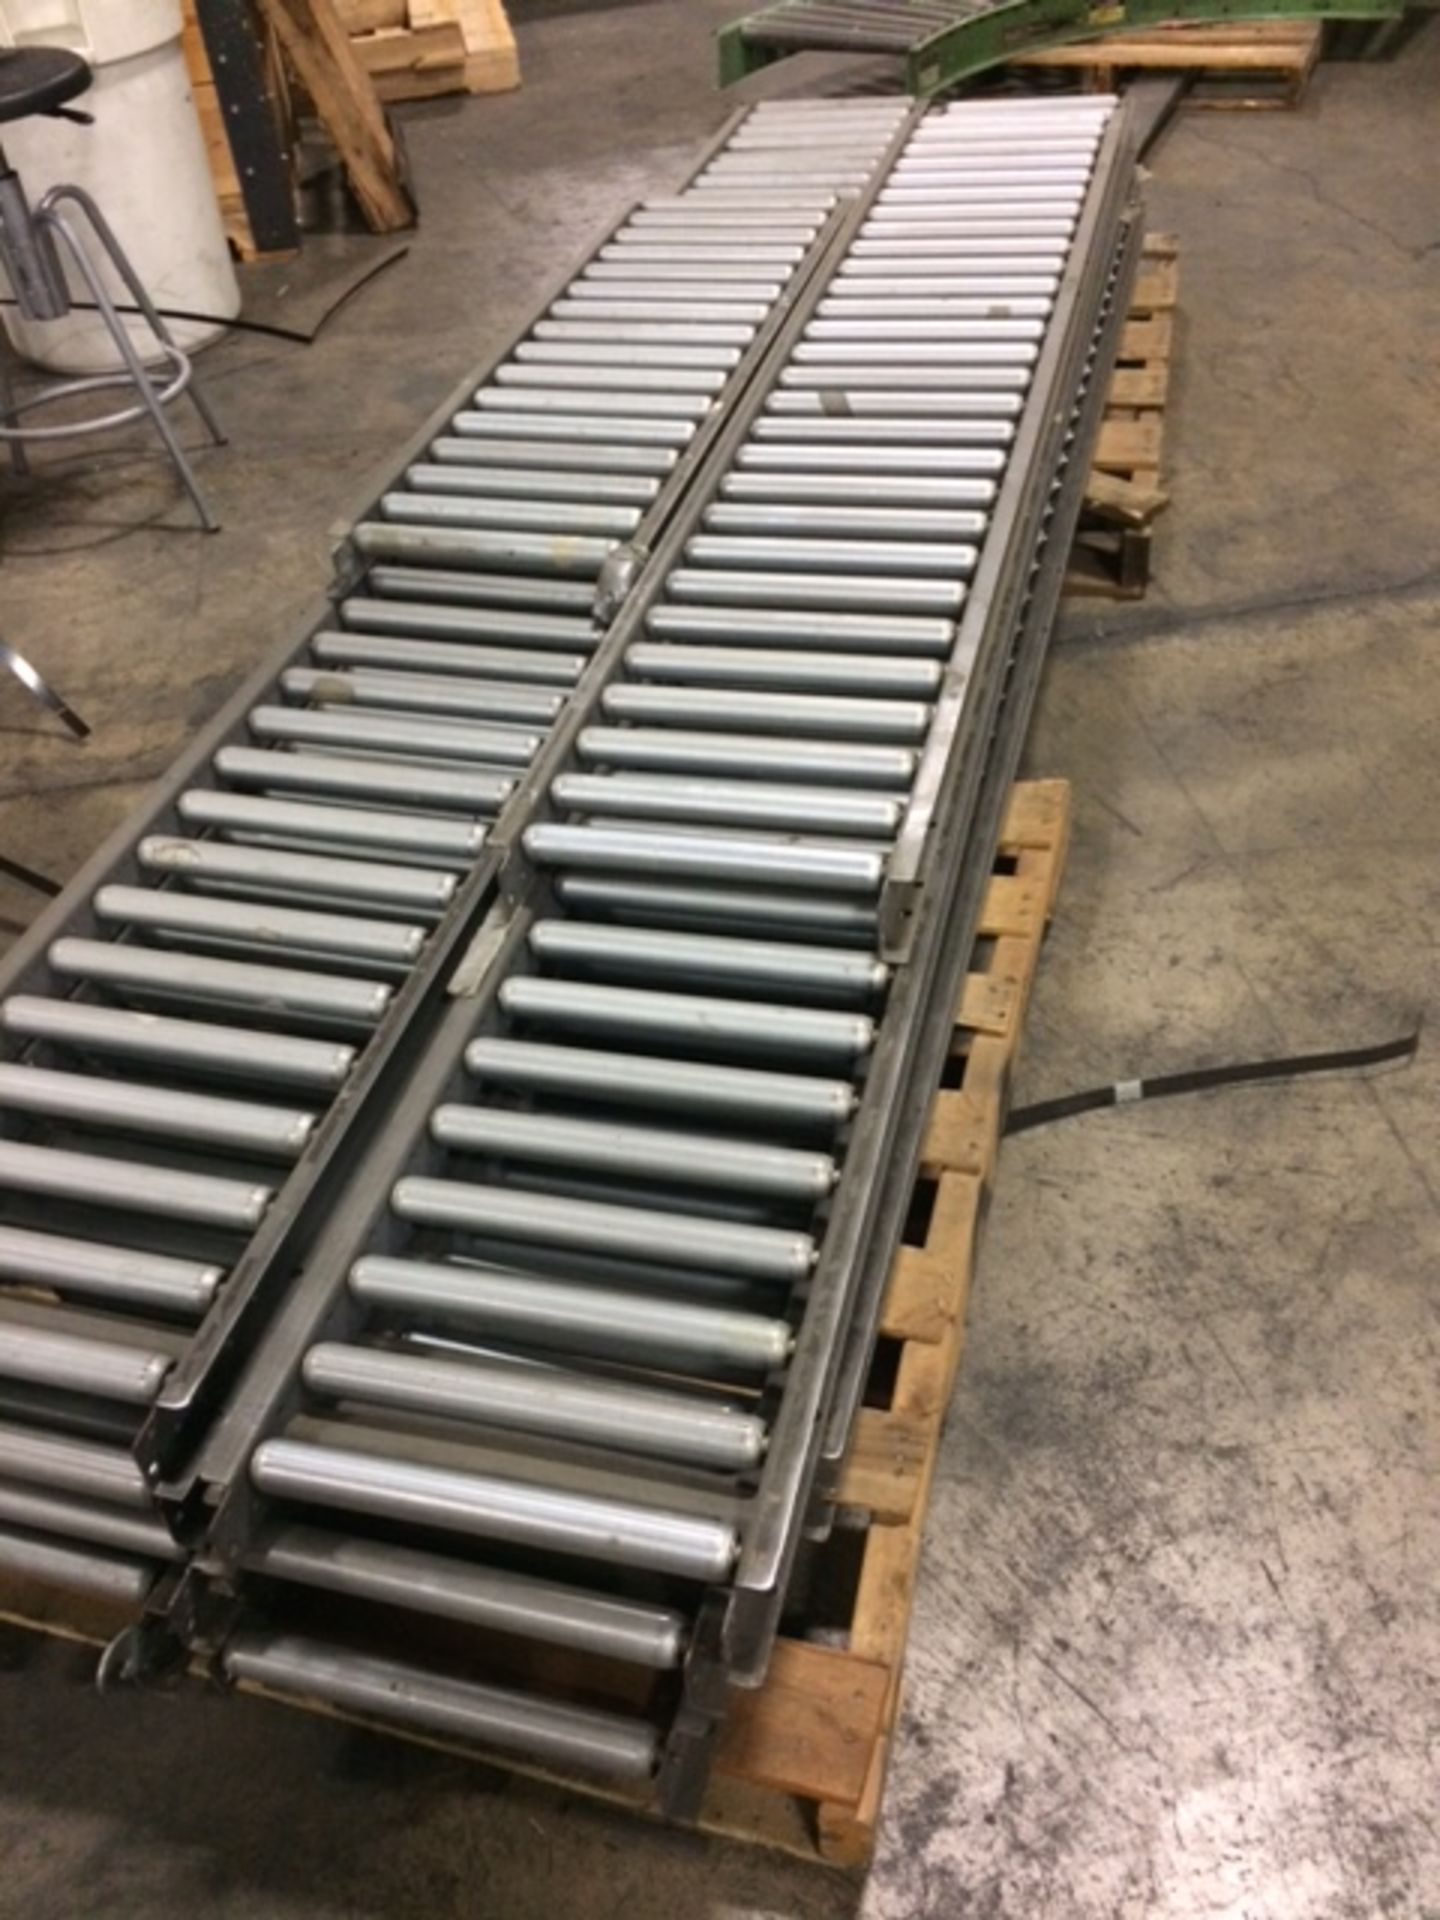 GRAVITY ROLLER CONVEYOR 18"W X 120" - 1.5" ROLLERS 3" O.C. (X20) - Image 2 of 2